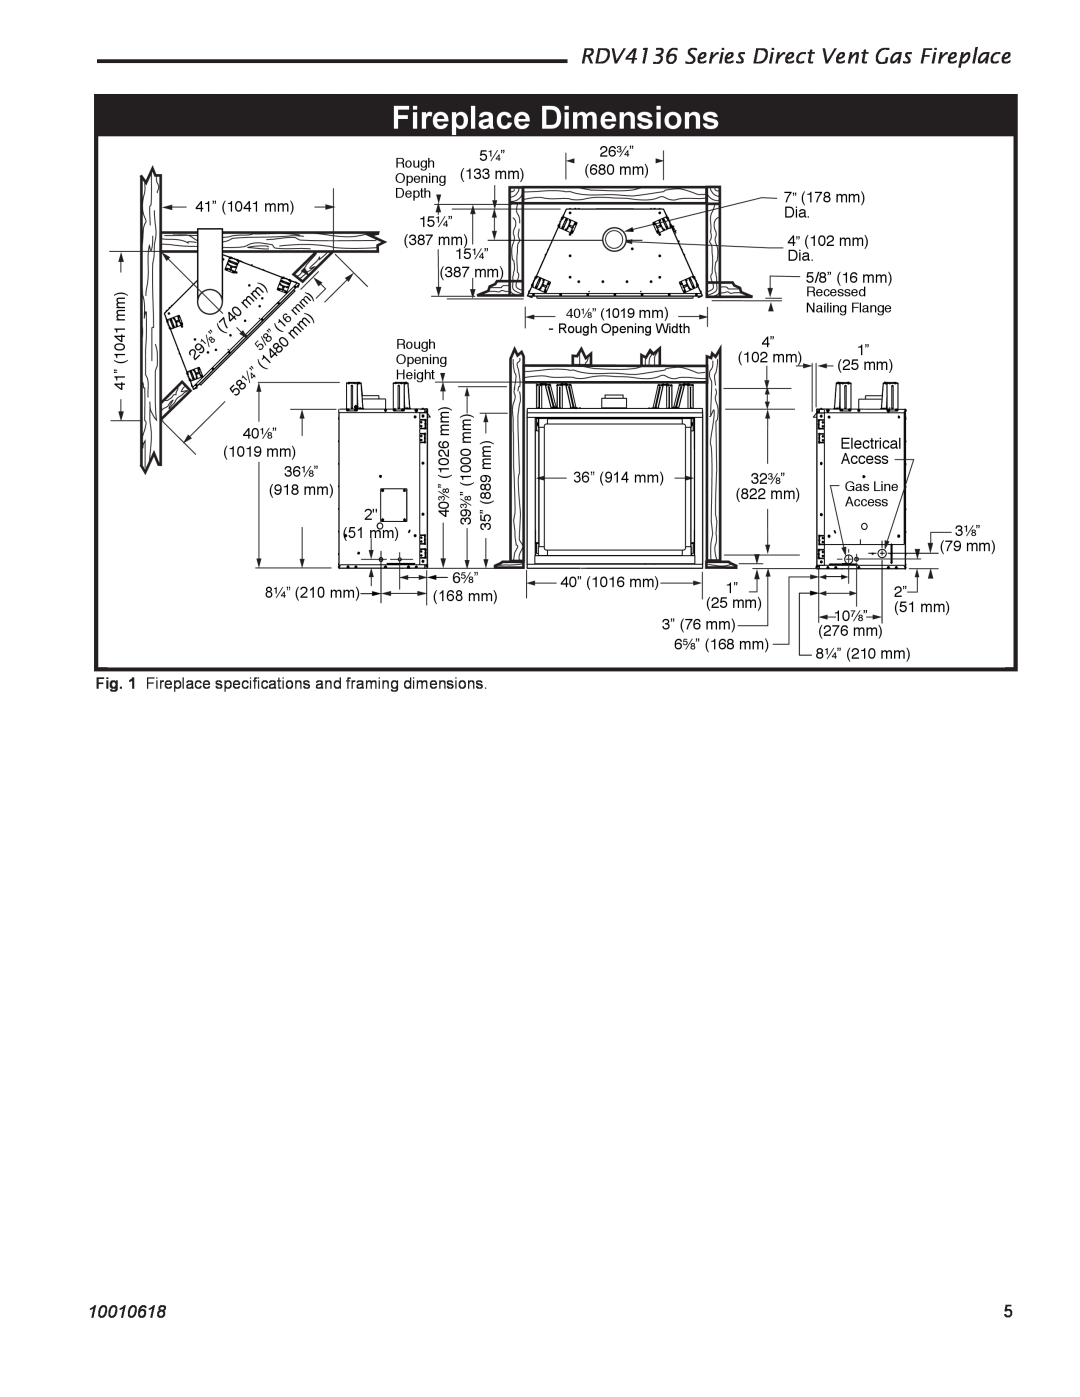 Majestic Appliances installation instructions Fireplace Dimensions, RDV4136 Series Direct Vent Gas Fireplace, 10010618 